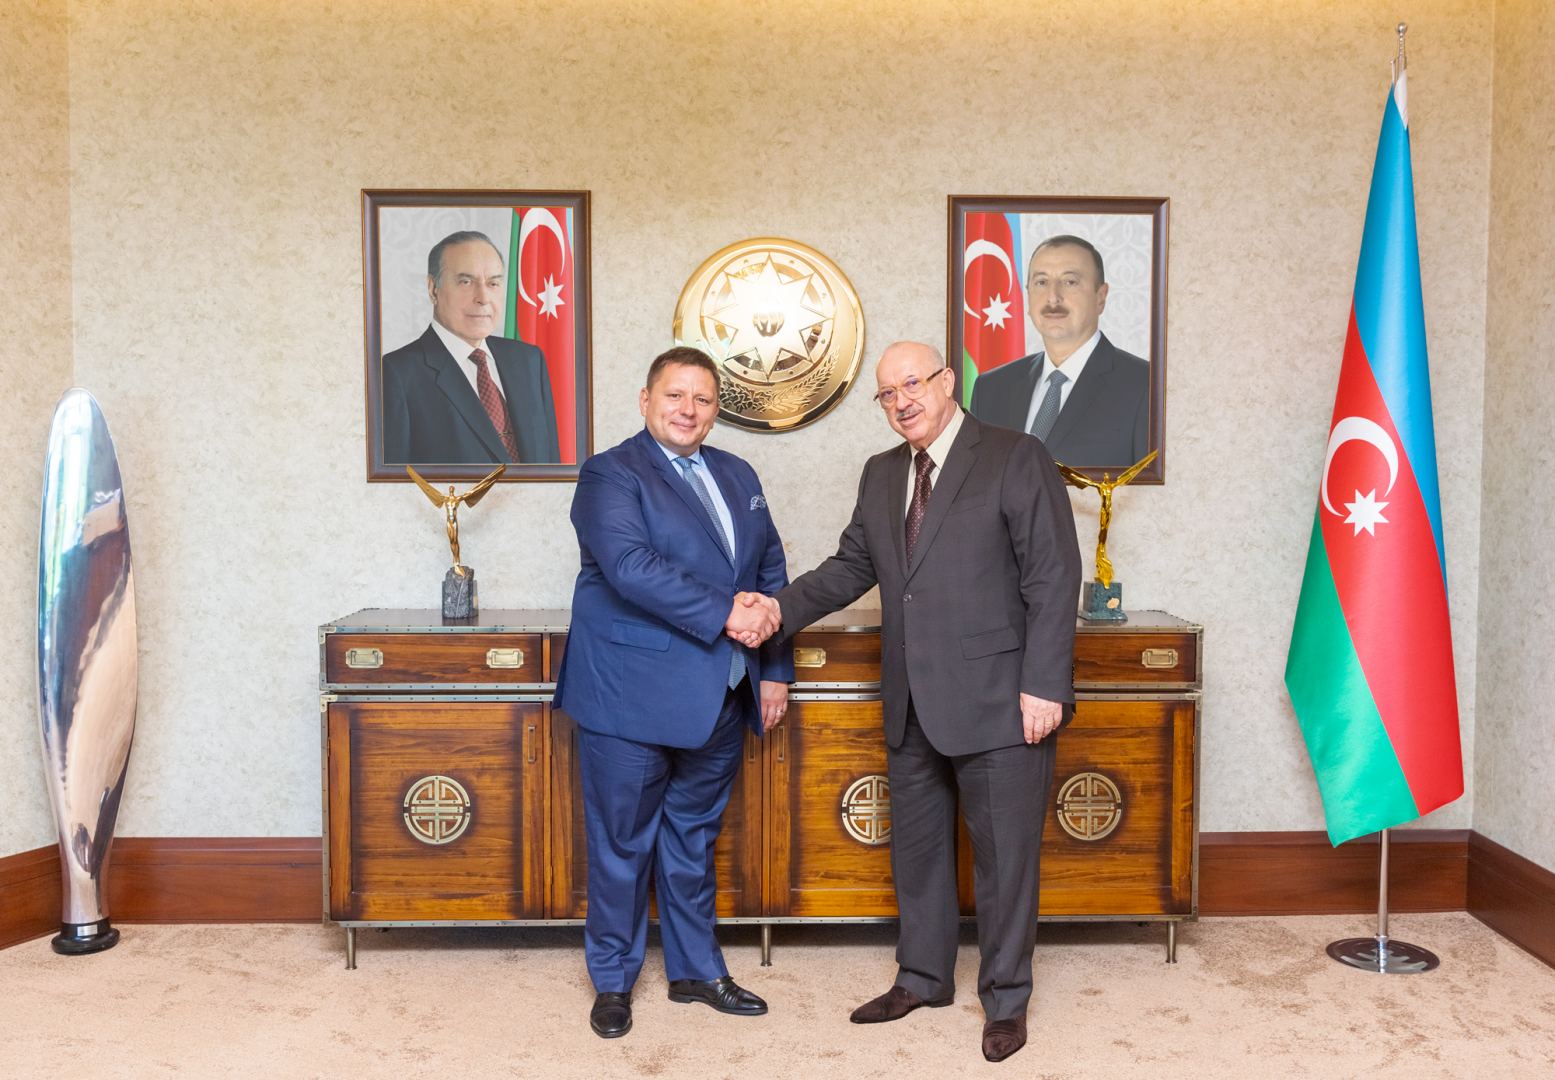 AZAL and LOT expressed satisfaction with fruitful cooperation (PHOTO)